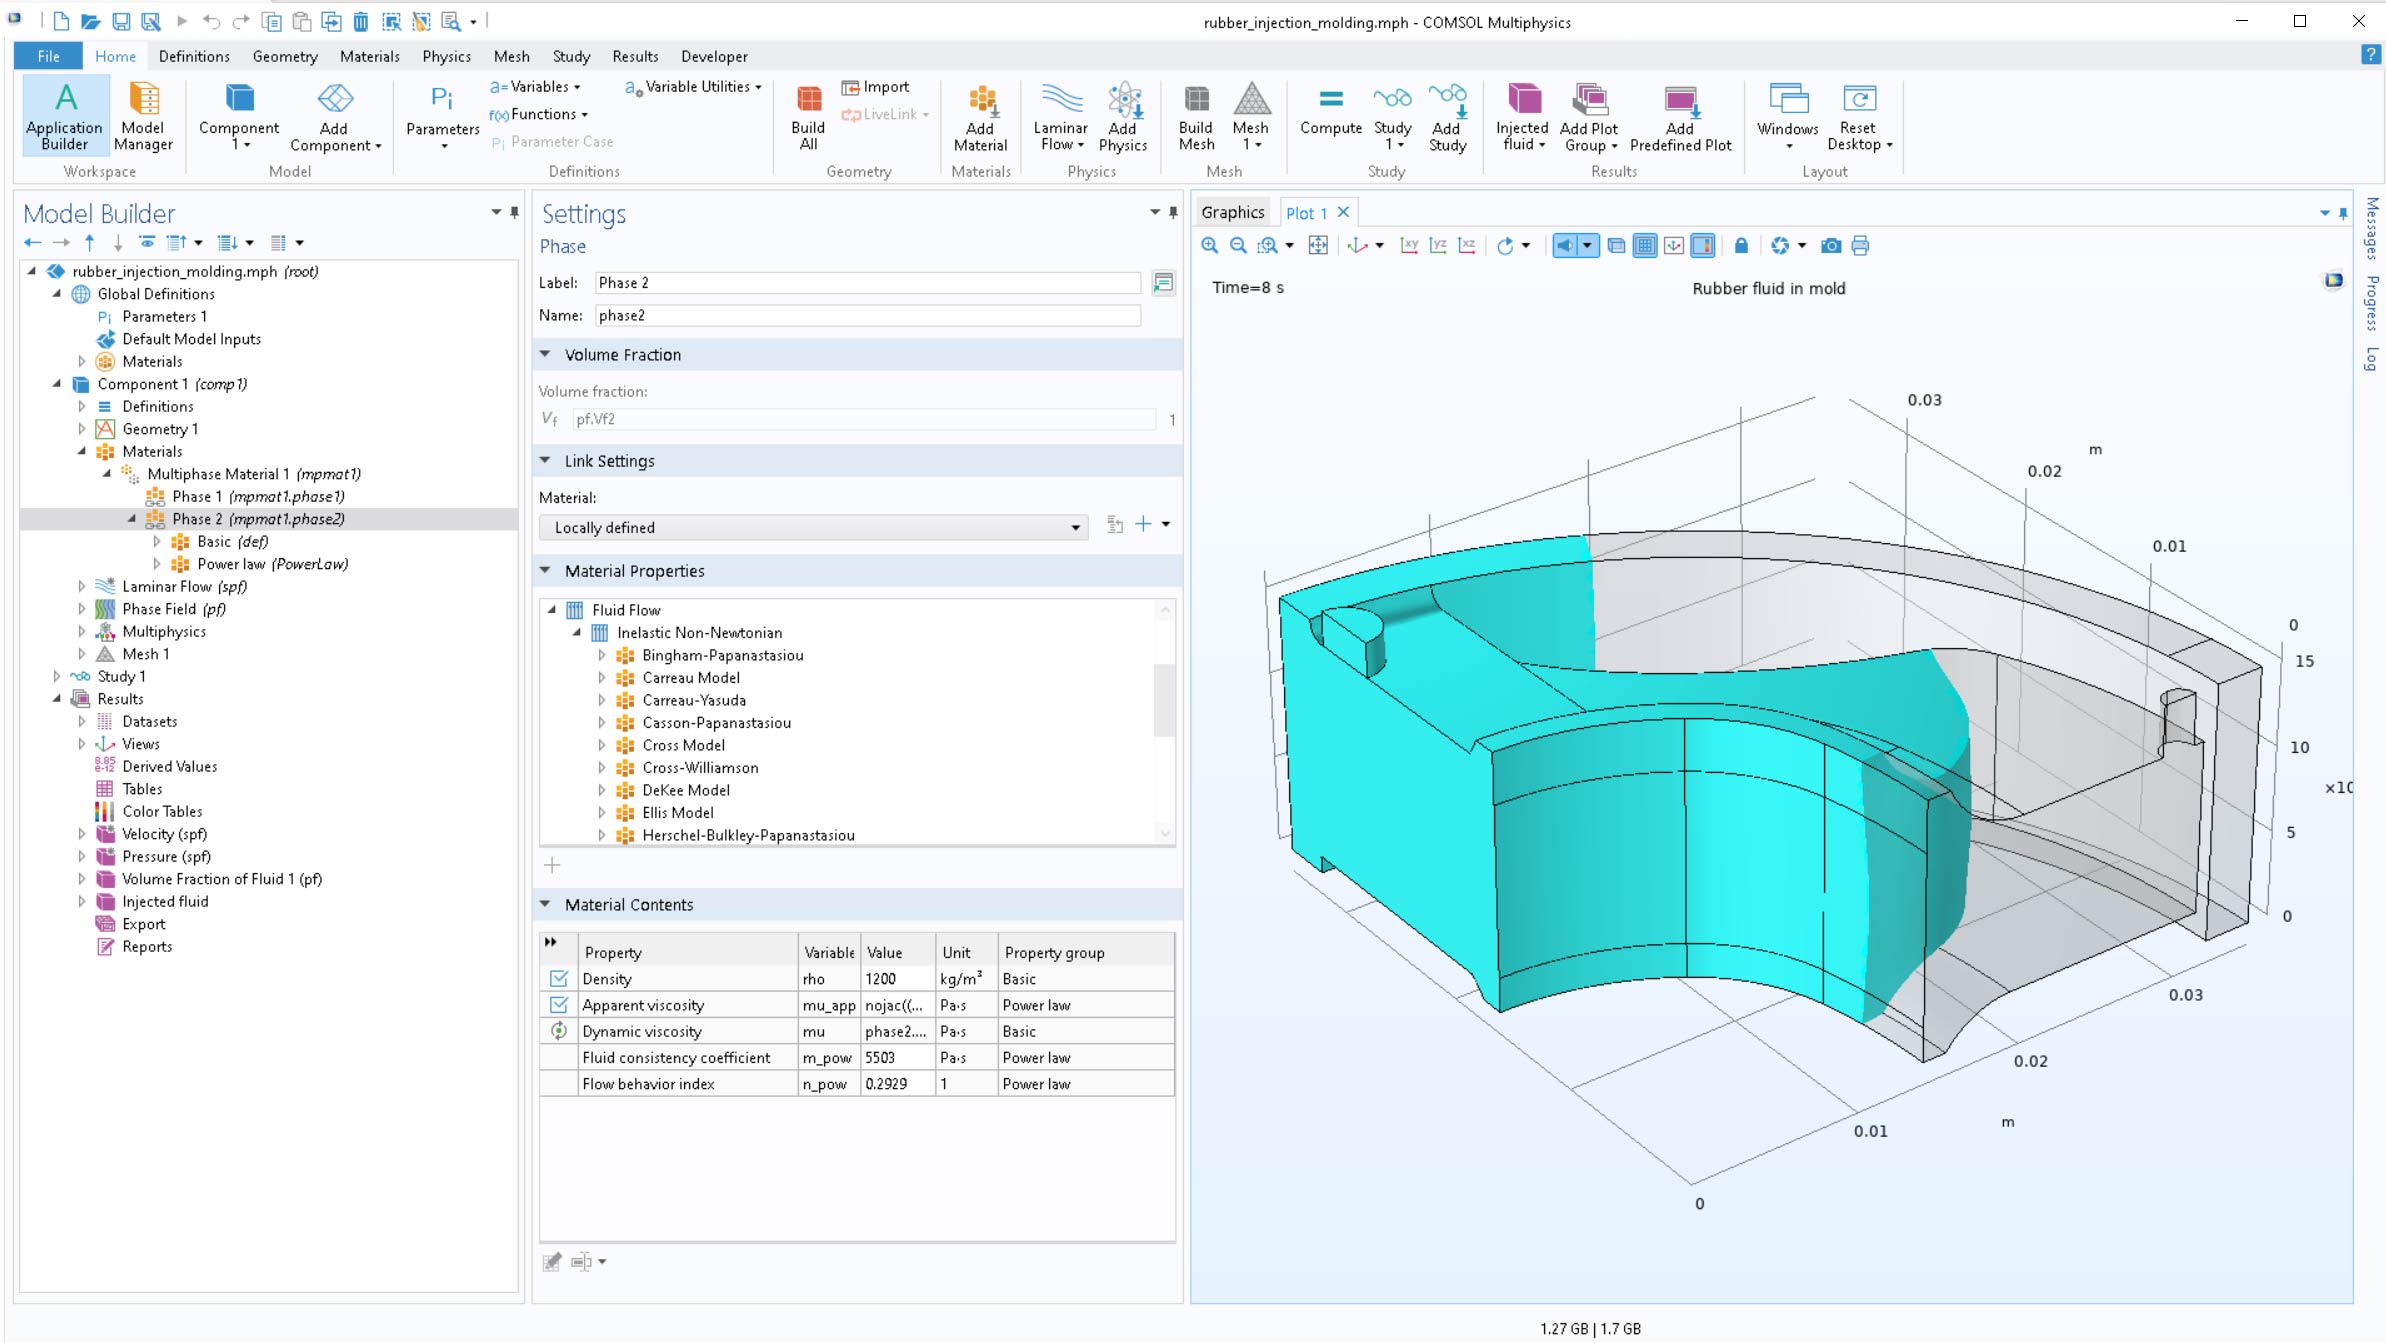 The COMSOL Multiphysics UI showing the Model Builder with a Phase node highlighted, the corresponding Settings window, and the Rubber Injection Molding model in the Graphics window.